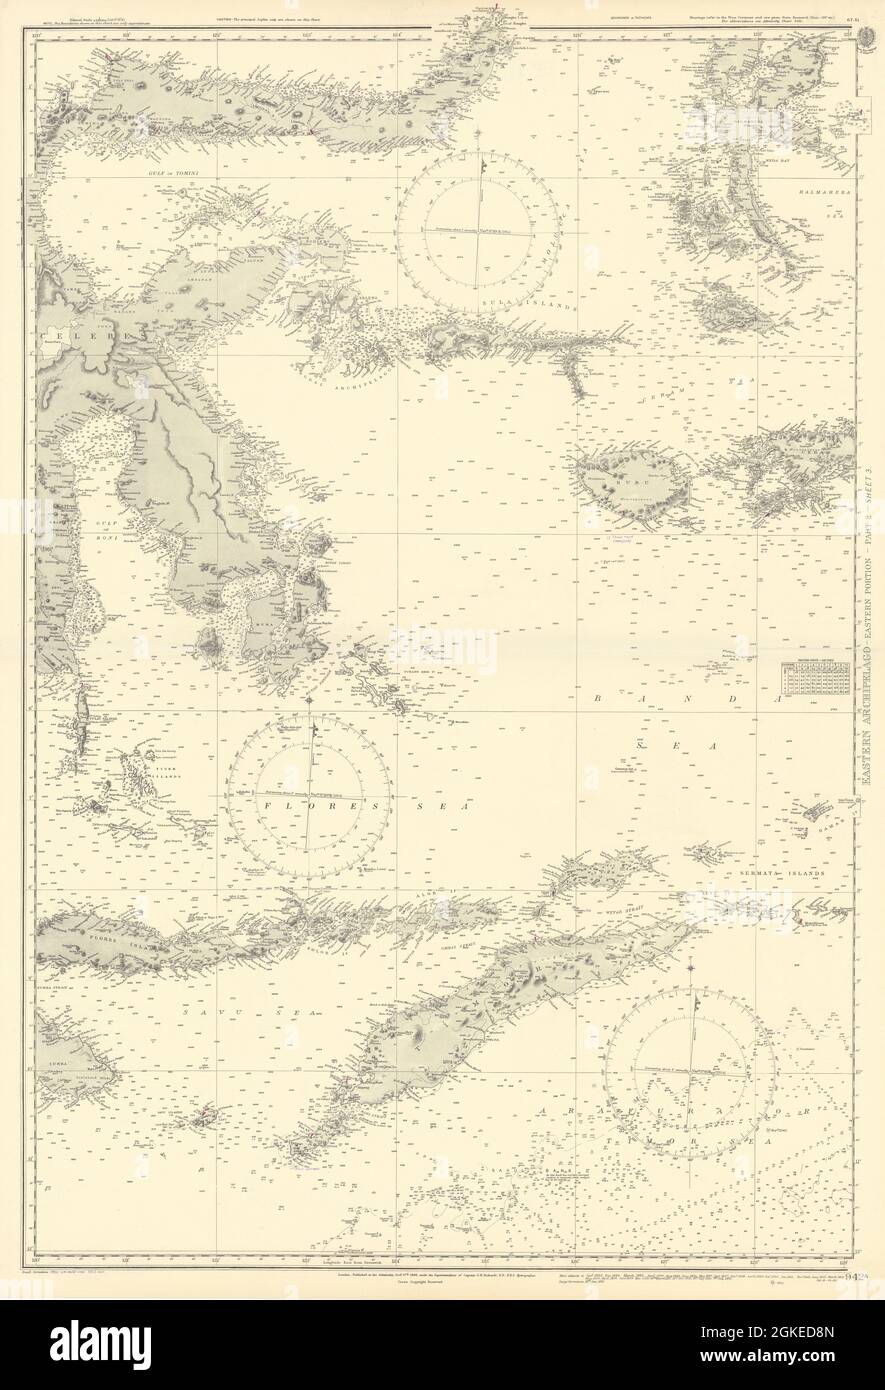 Eastern Indonesia. Timor Sulawesi Moluccas. ADMIRALTY sea chart 1868 (1954) map Stock Photo